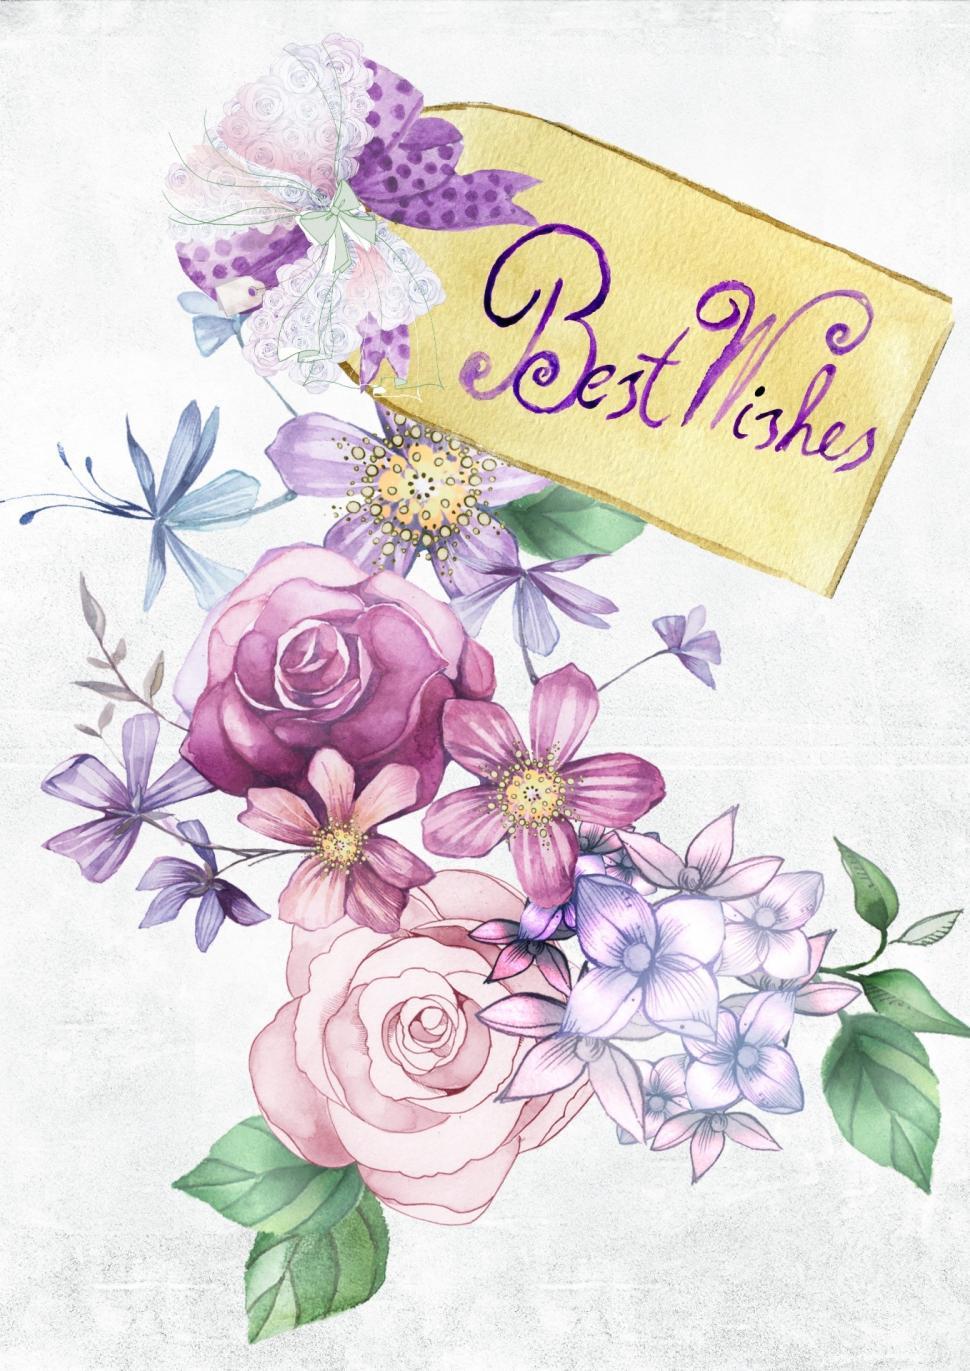 Free Image of Bouquet of Flowers With Best Wishes Sign 